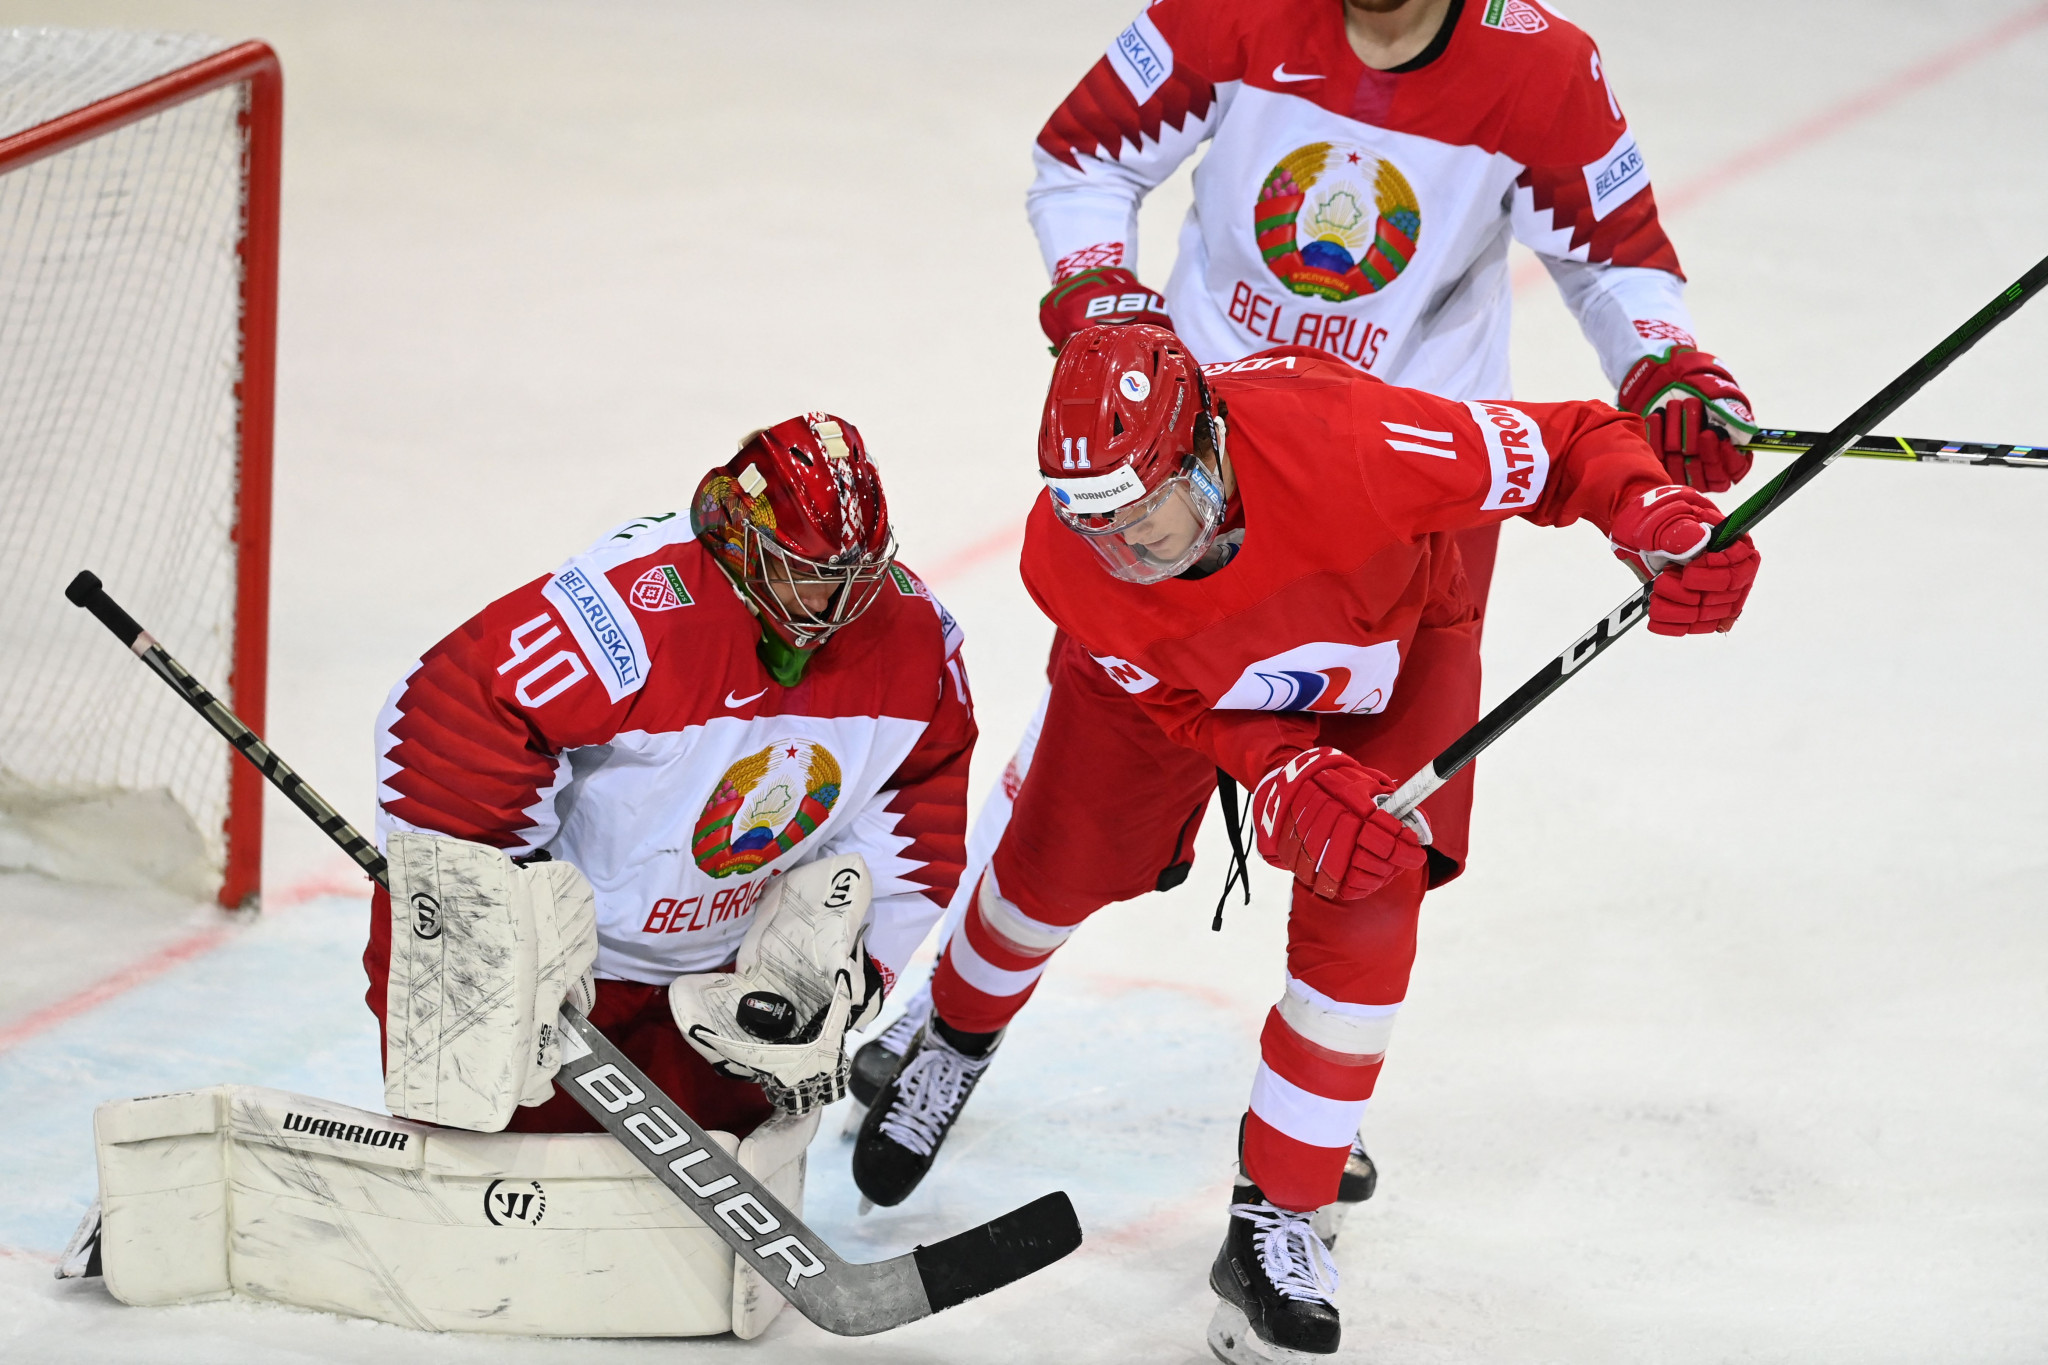 Russia and Belarus are set to play ice hockey friendlies in May ©Getty Images